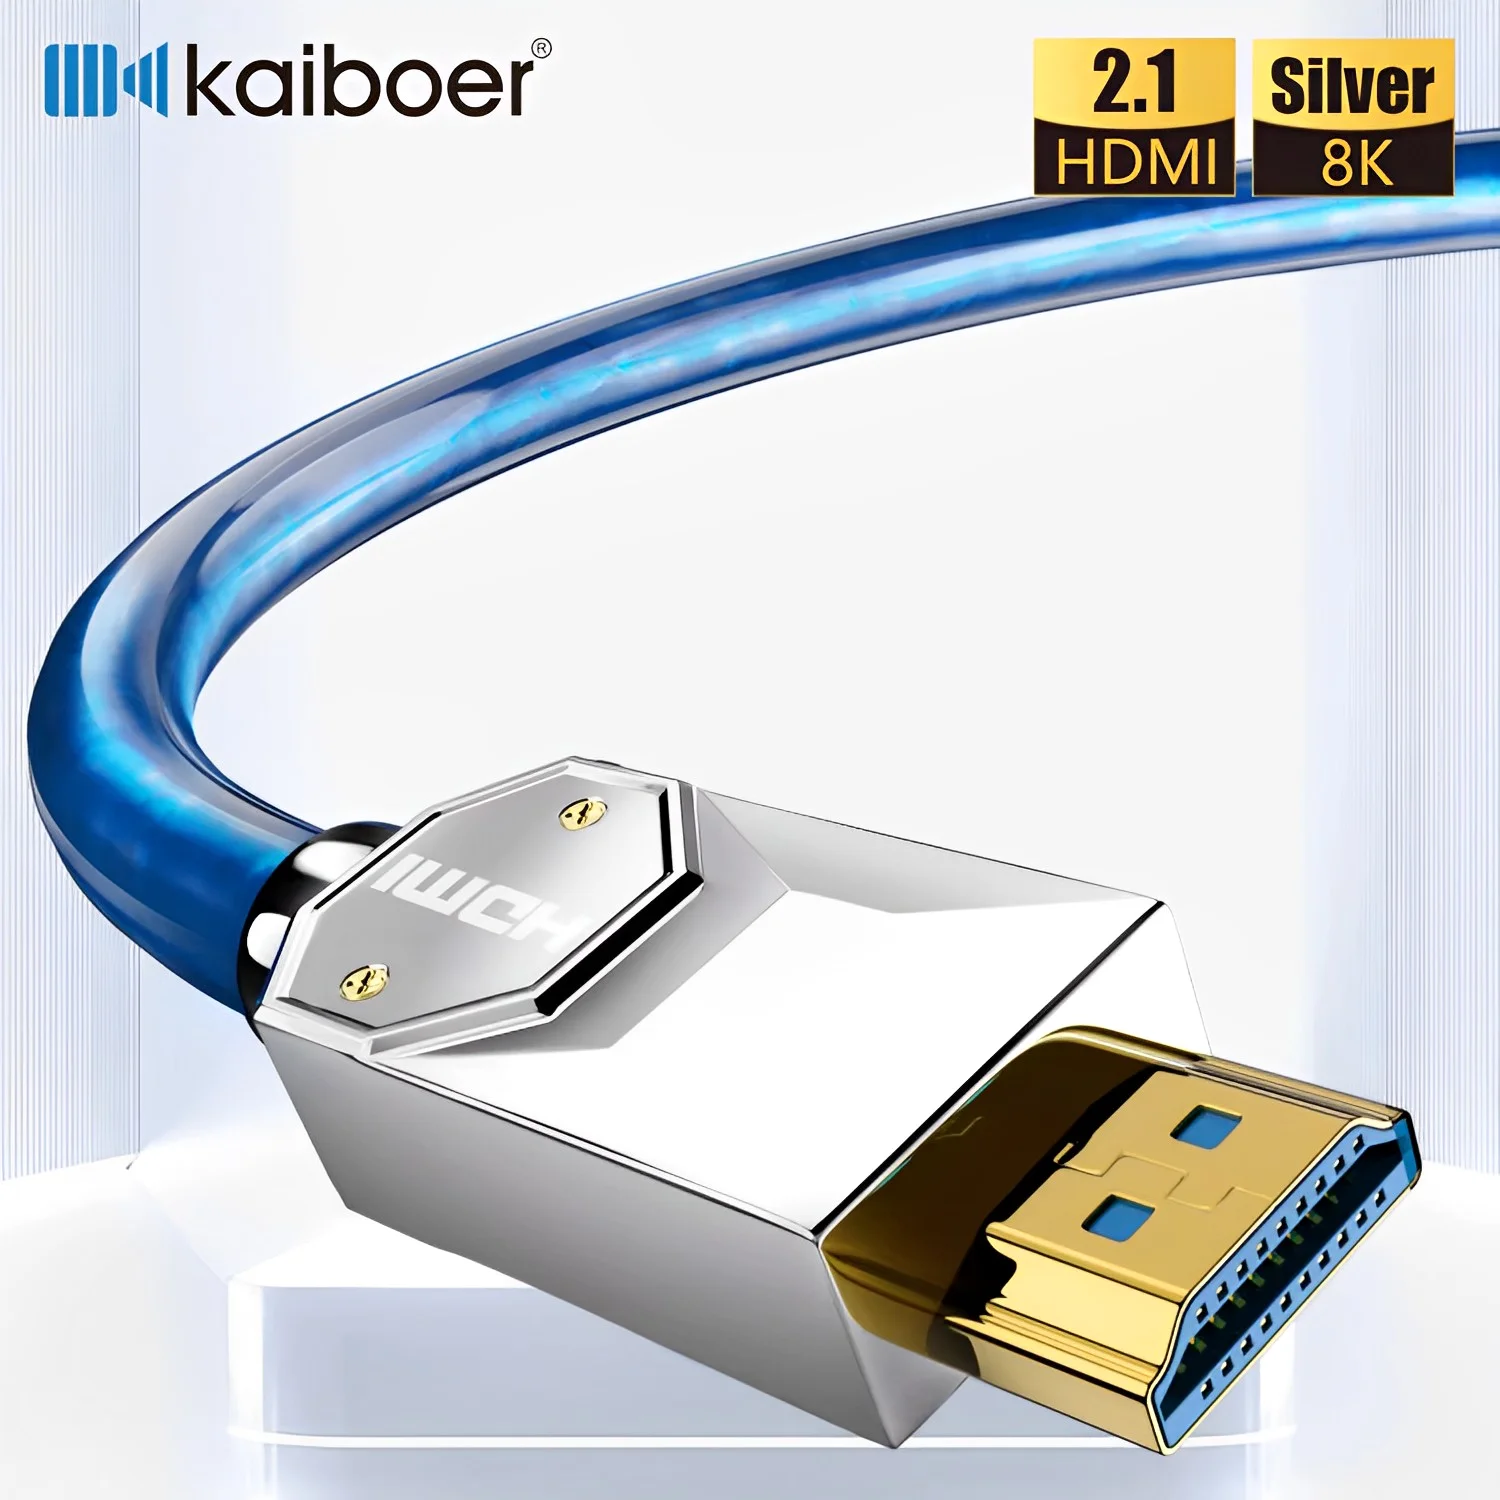 

Kaiboer HDMI 2.1 Cable 8K@60Hz 4K@120Hz 48Gbps EARC ARC HDCP Ultra High Speed HDR for HD TV Laptop Projector PS4 PS5